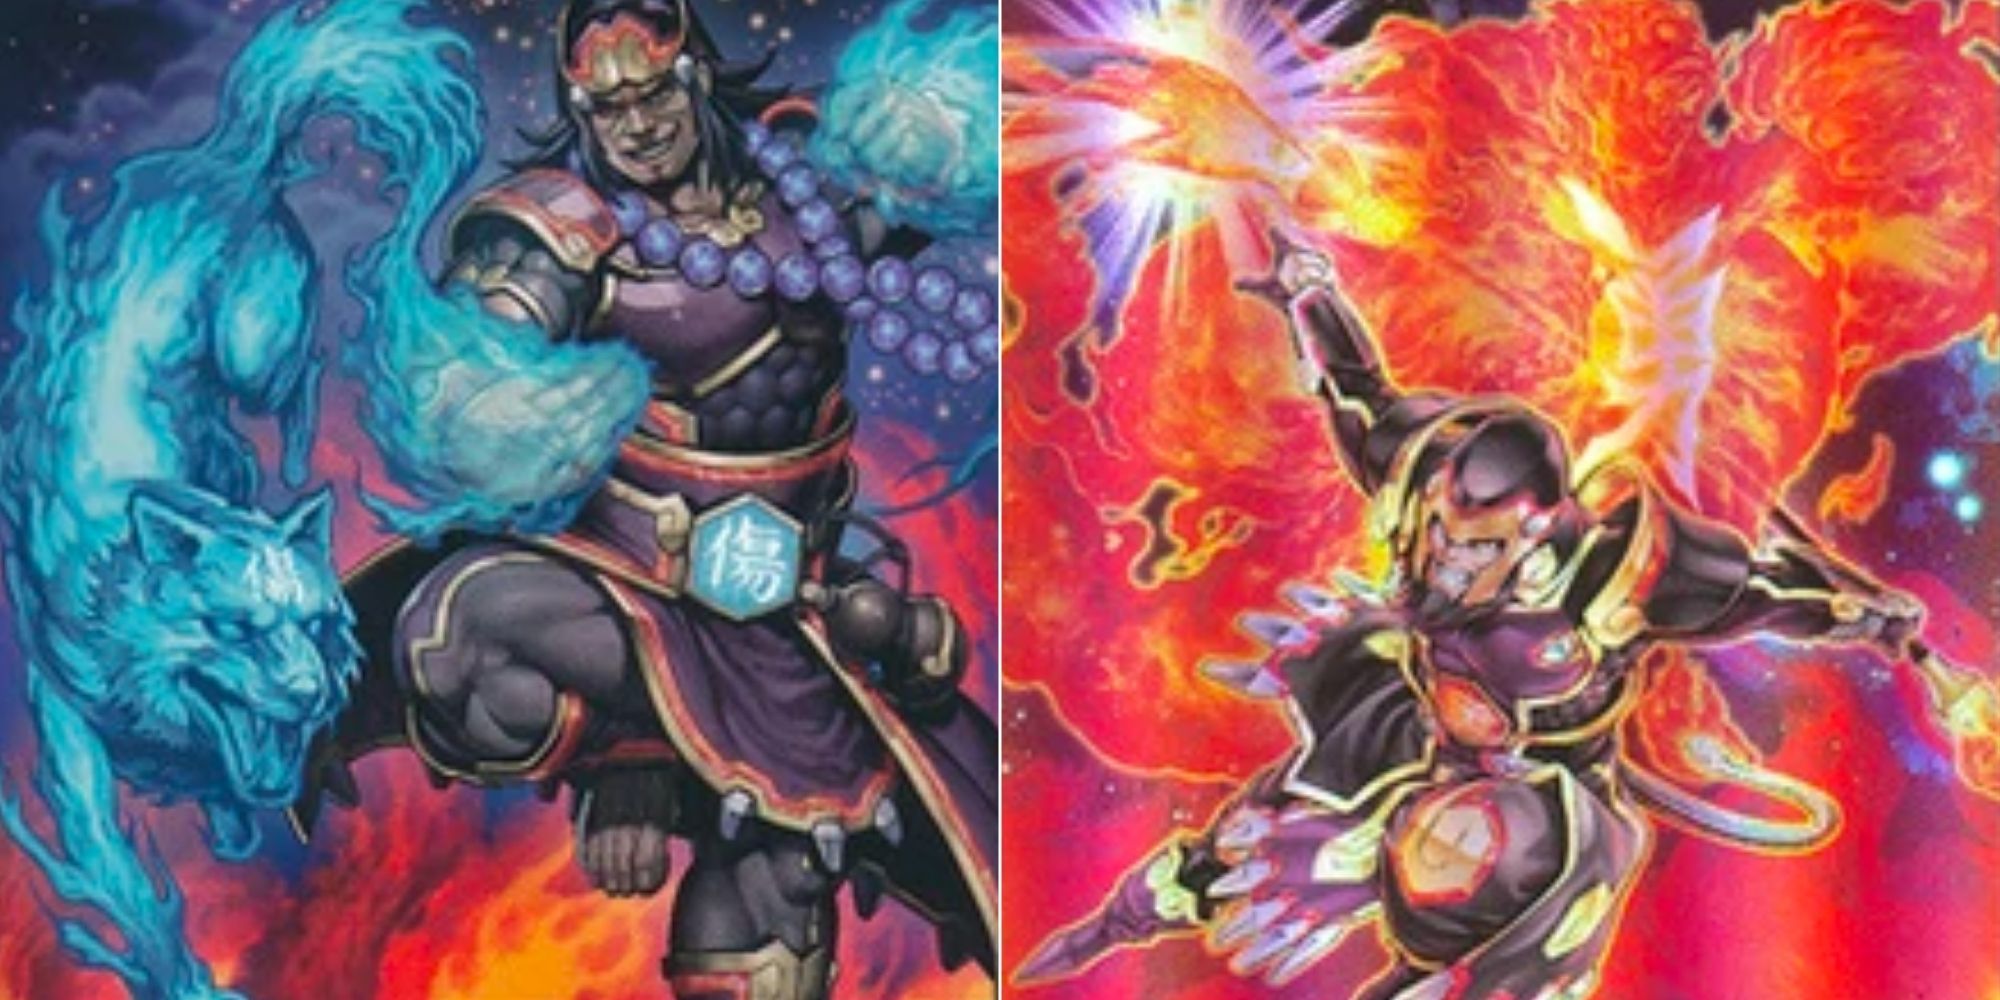  Fire Fist archetype cards in Yu-Gi-Oh!